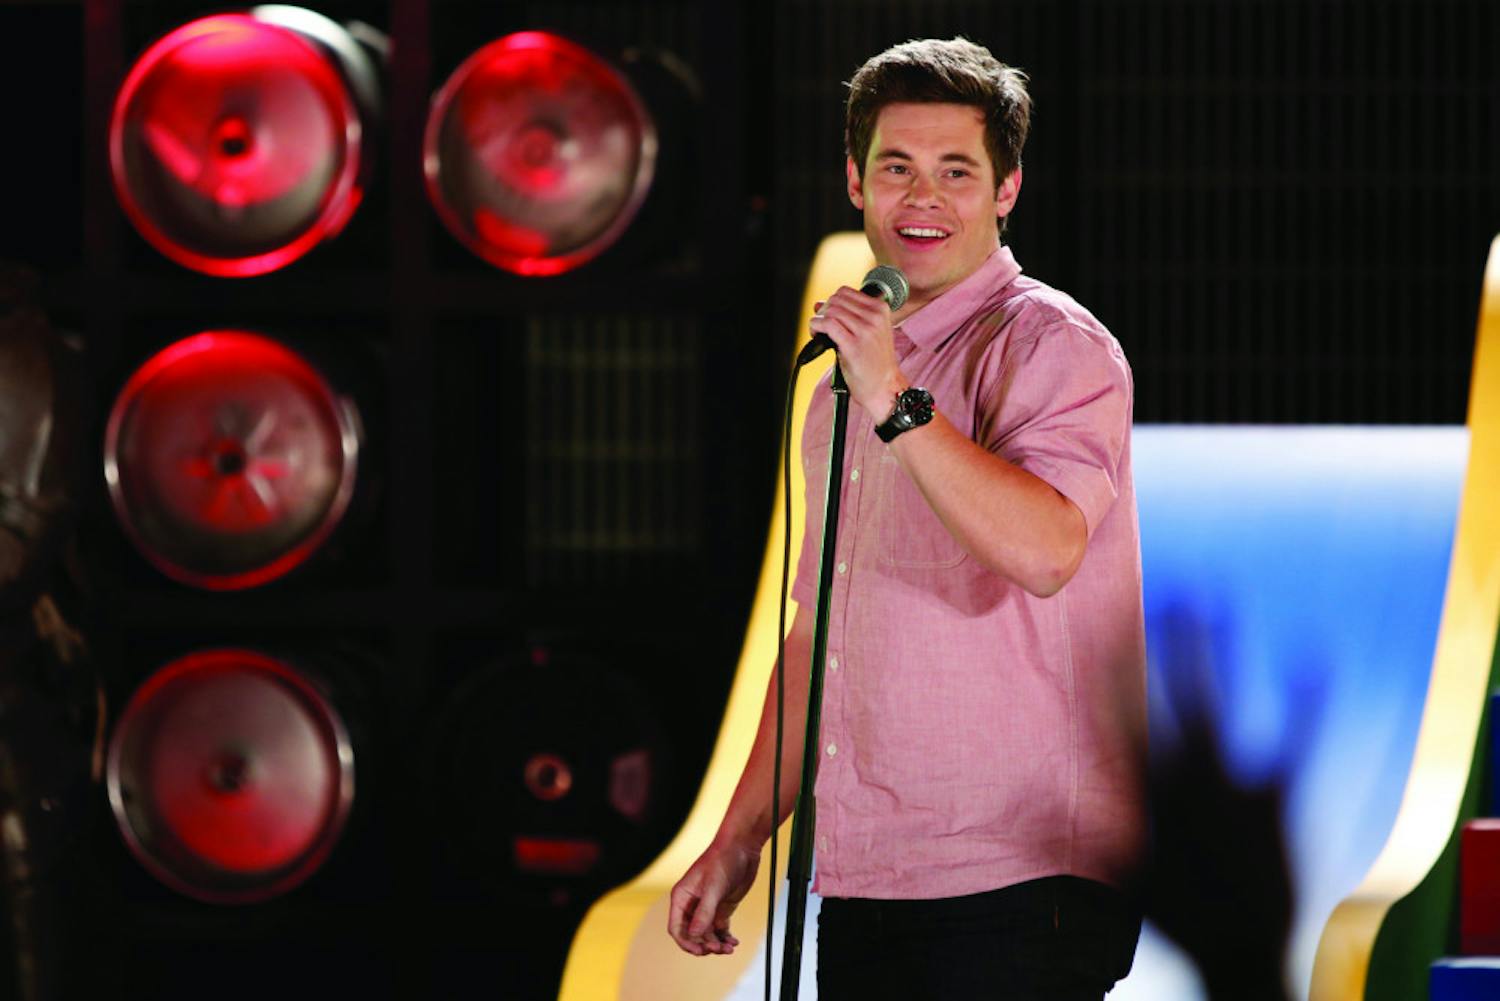 Adam Devine’s new Comedy Central series, “Adam Devine’s House Party,” airs Thursday at 12:30 a.m. He hosts a stand-up showcase.